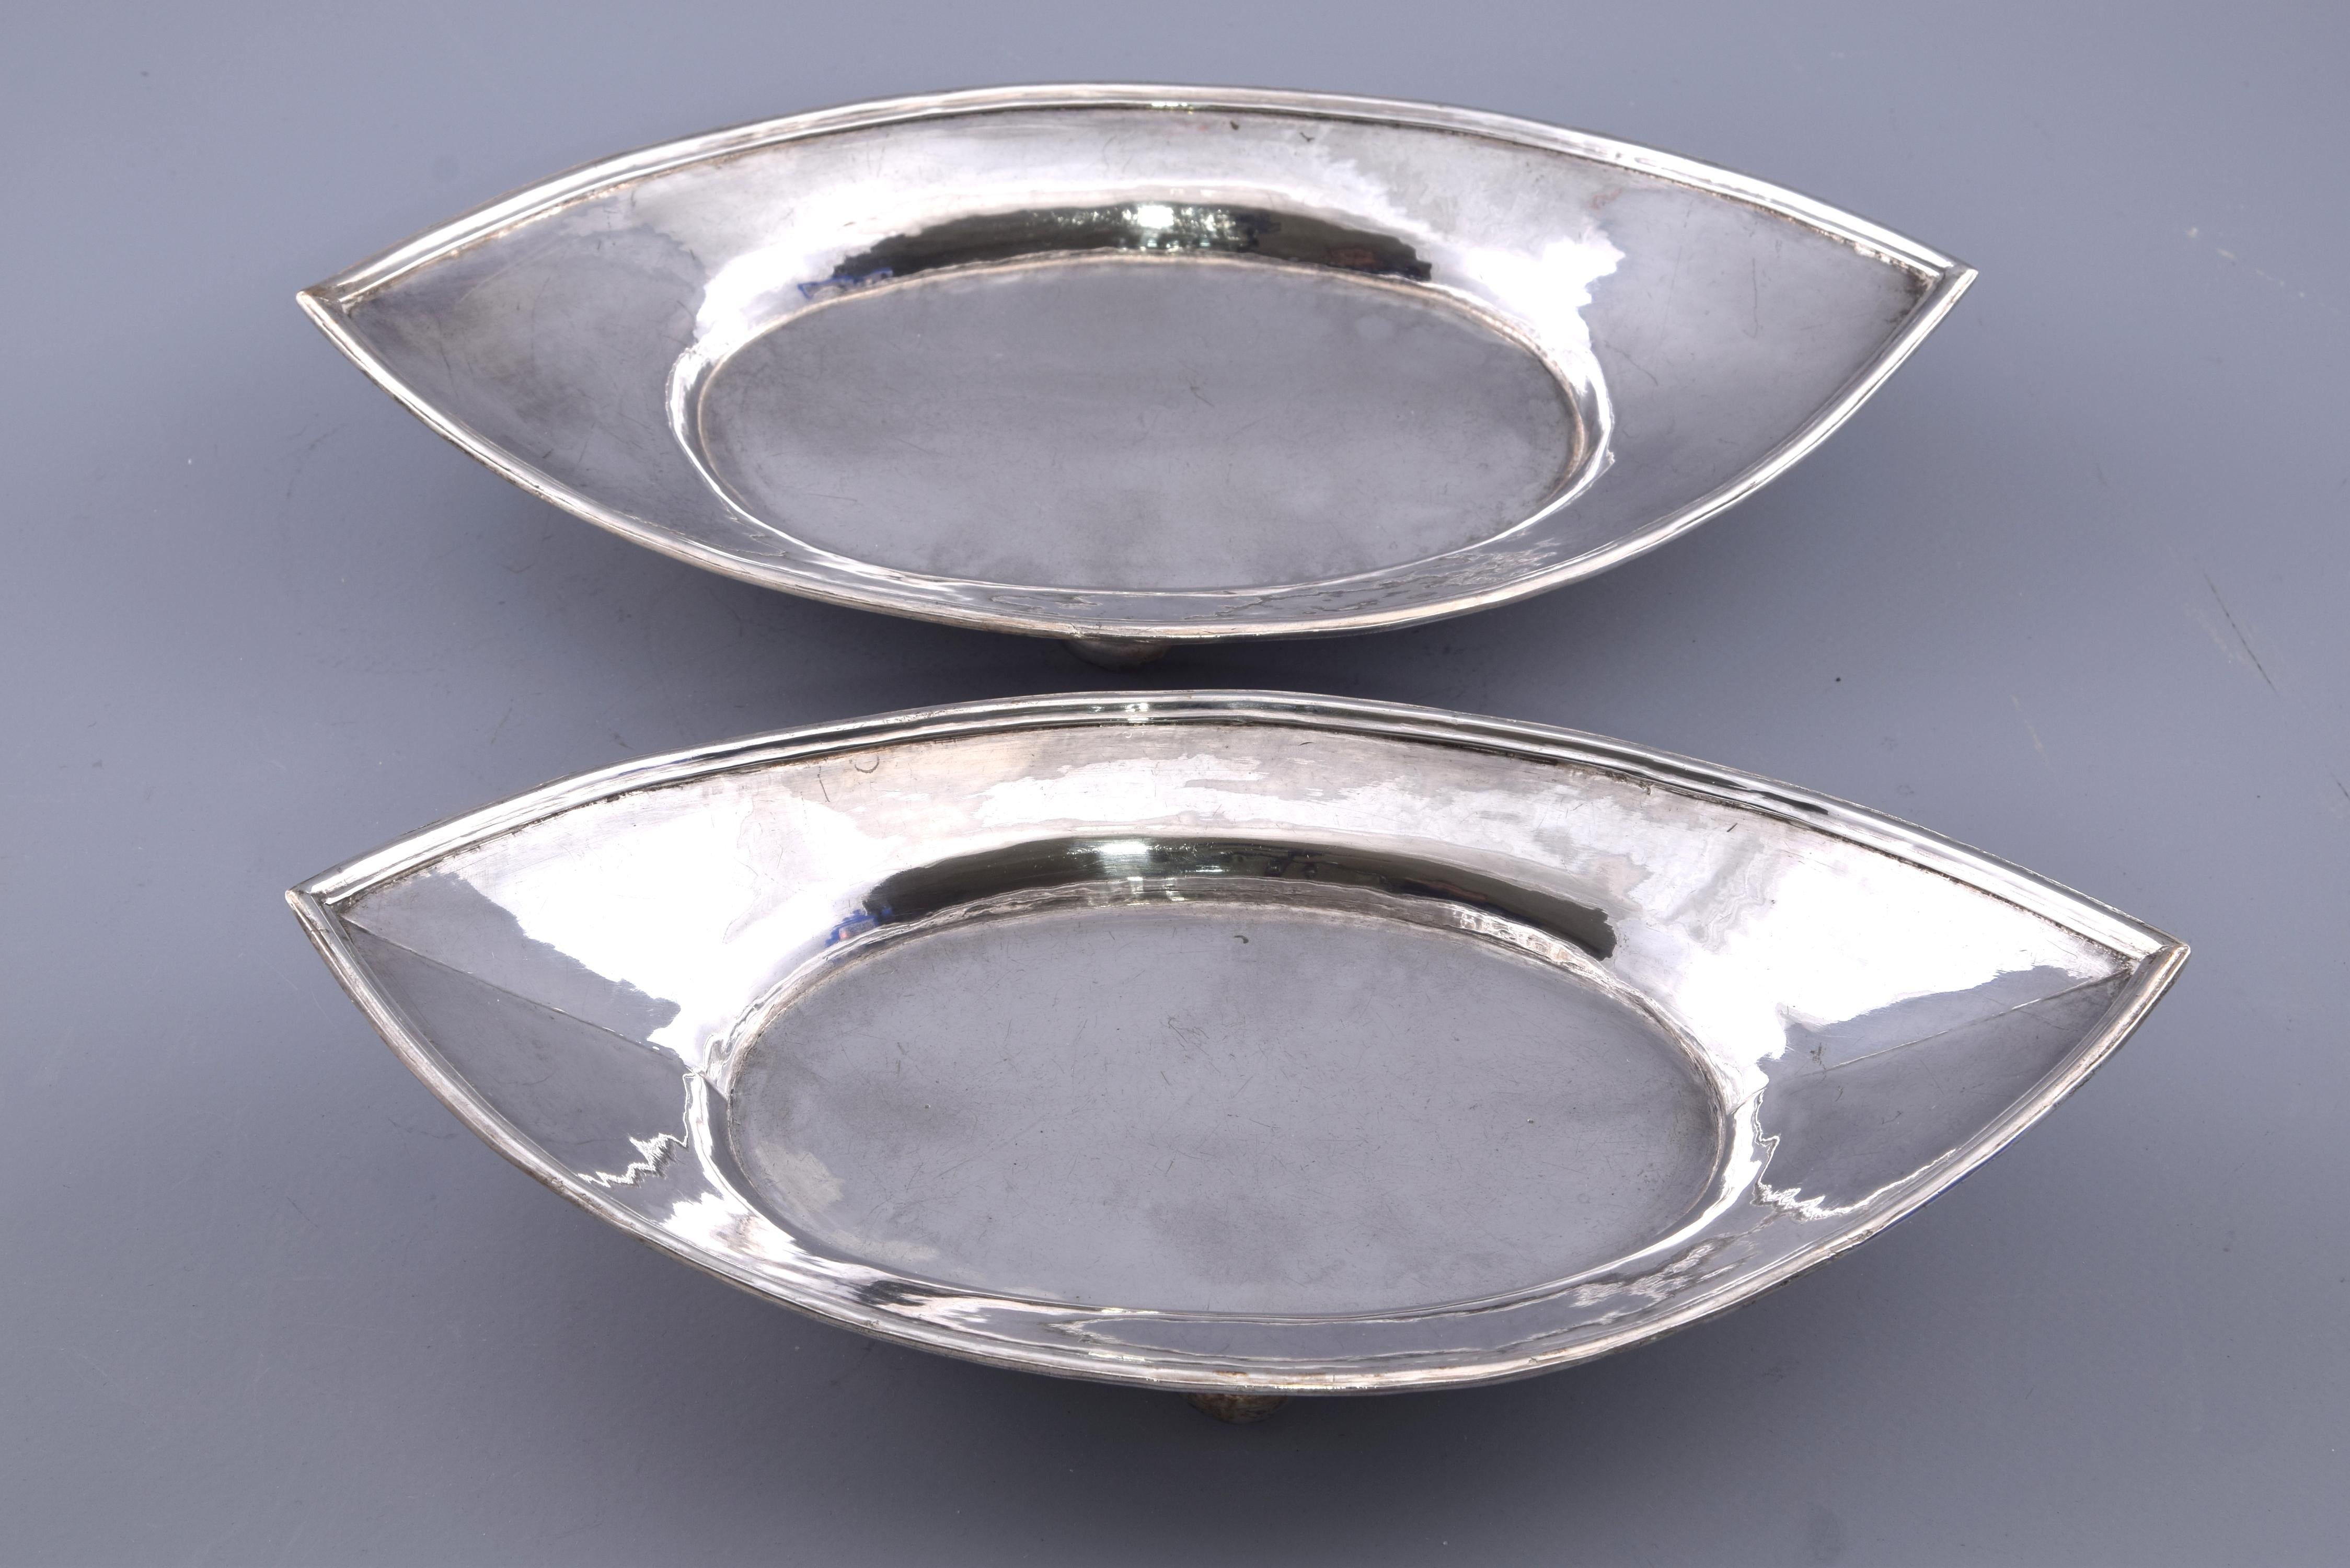 Pair of trays. Silver. Possibly Mexico, 18th century.
 With contrast marks.
 Two oval silver trays in their color and with a curled shape, finished in a point and slightly raised on four spheres each one that have been decorated in the upper part